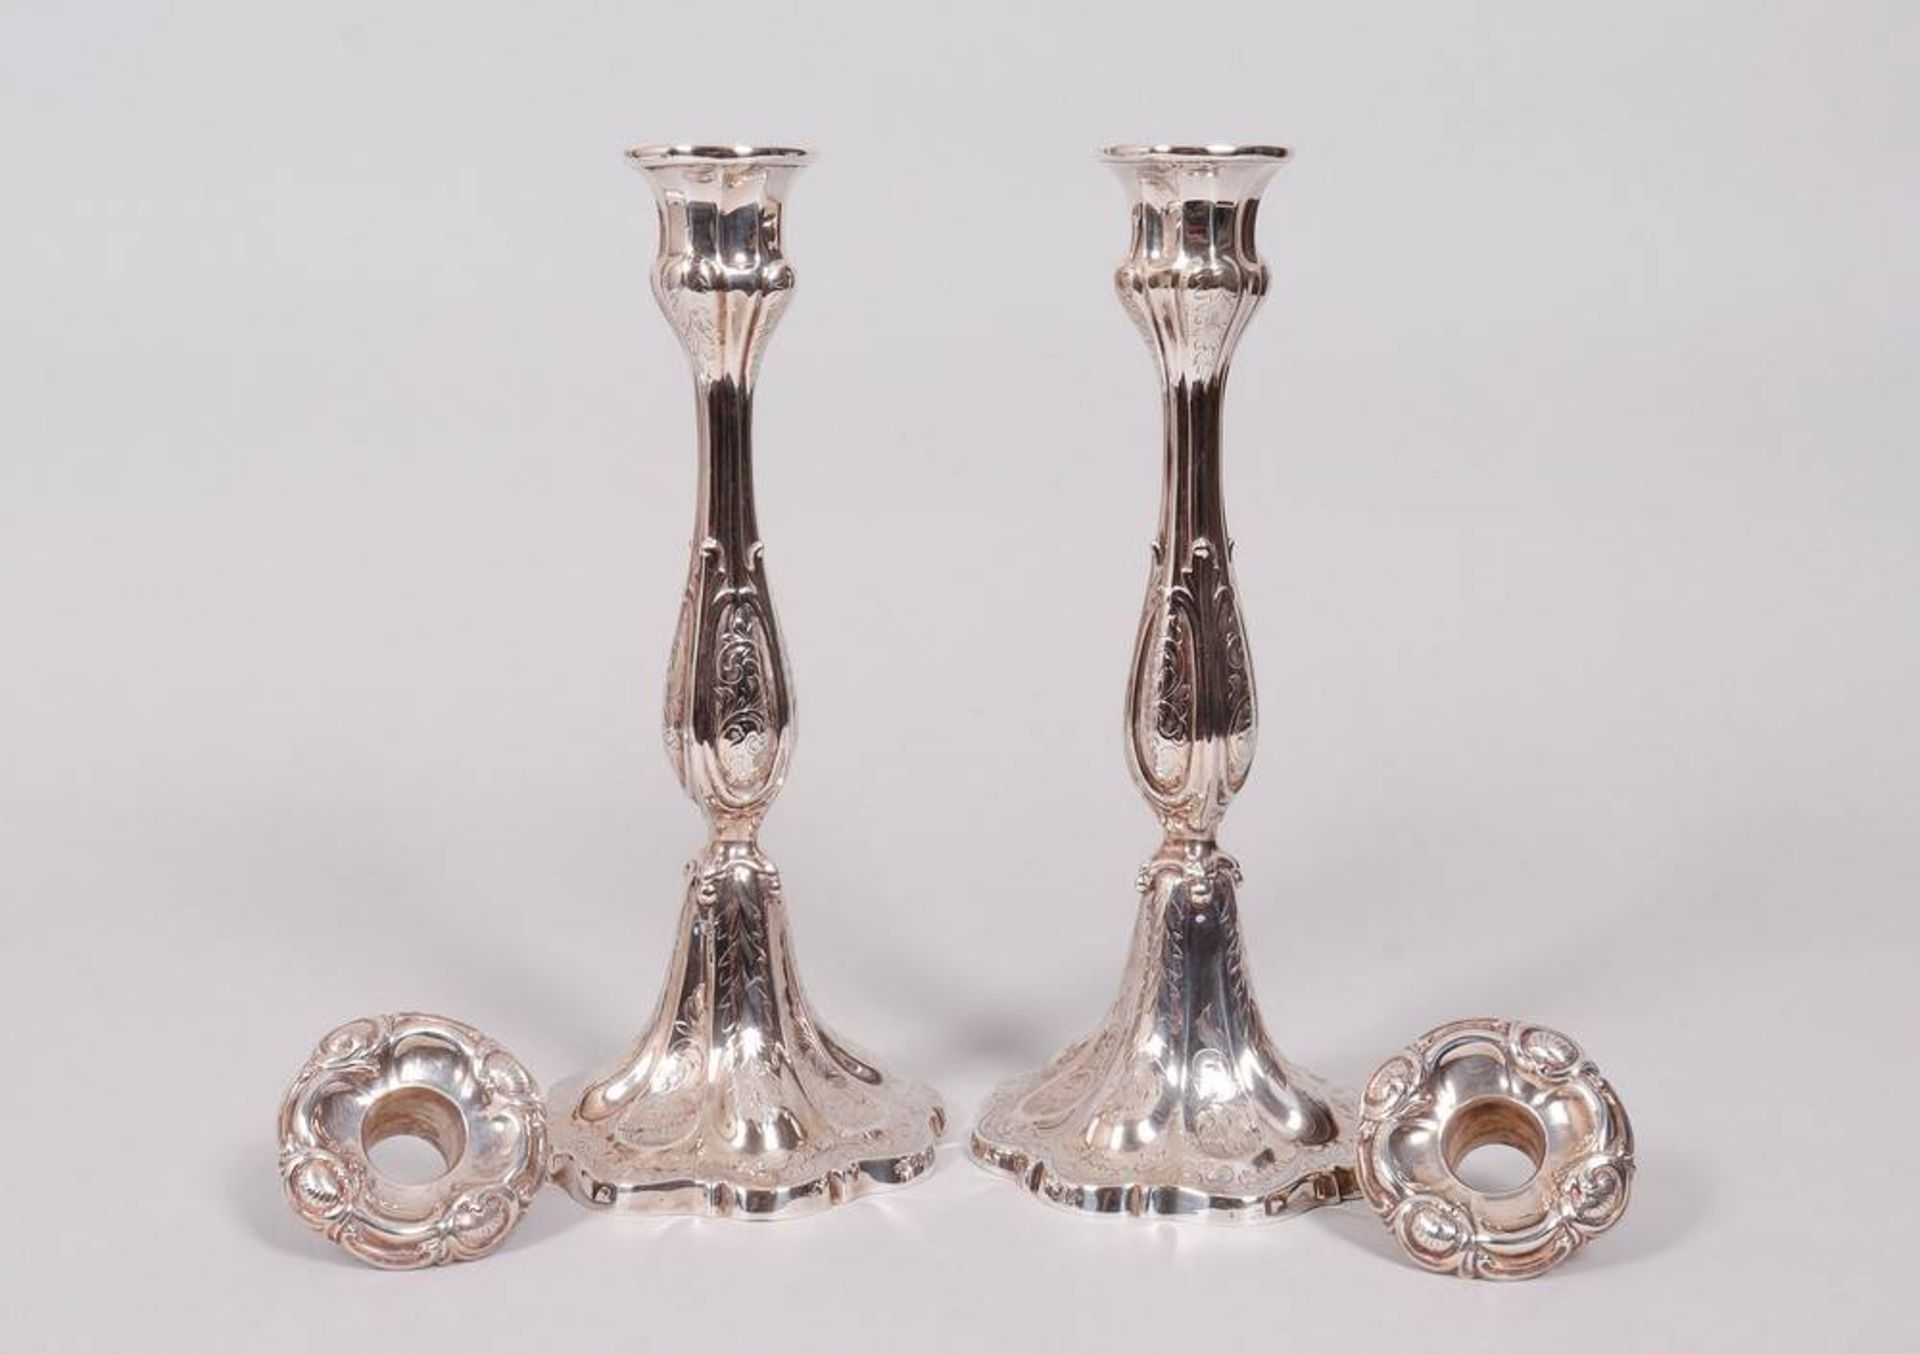 Pair of candlesticks, silver-plated, probably German, 20th C. - Image 3 of 4